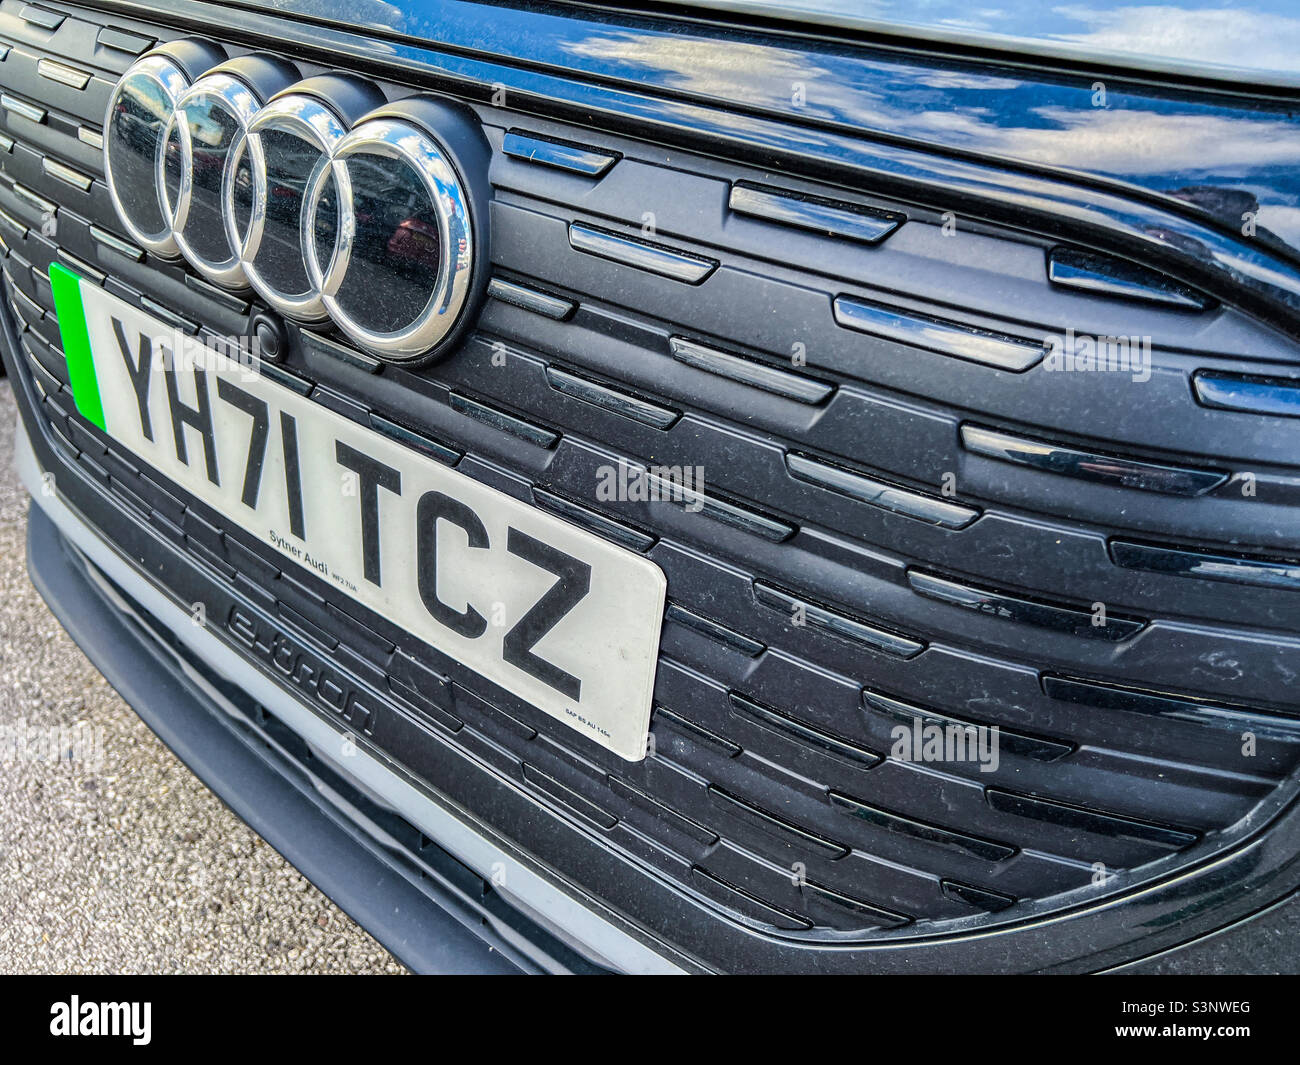 Front grill of the all electric Audi e-tron electric vehicle Stock Photo